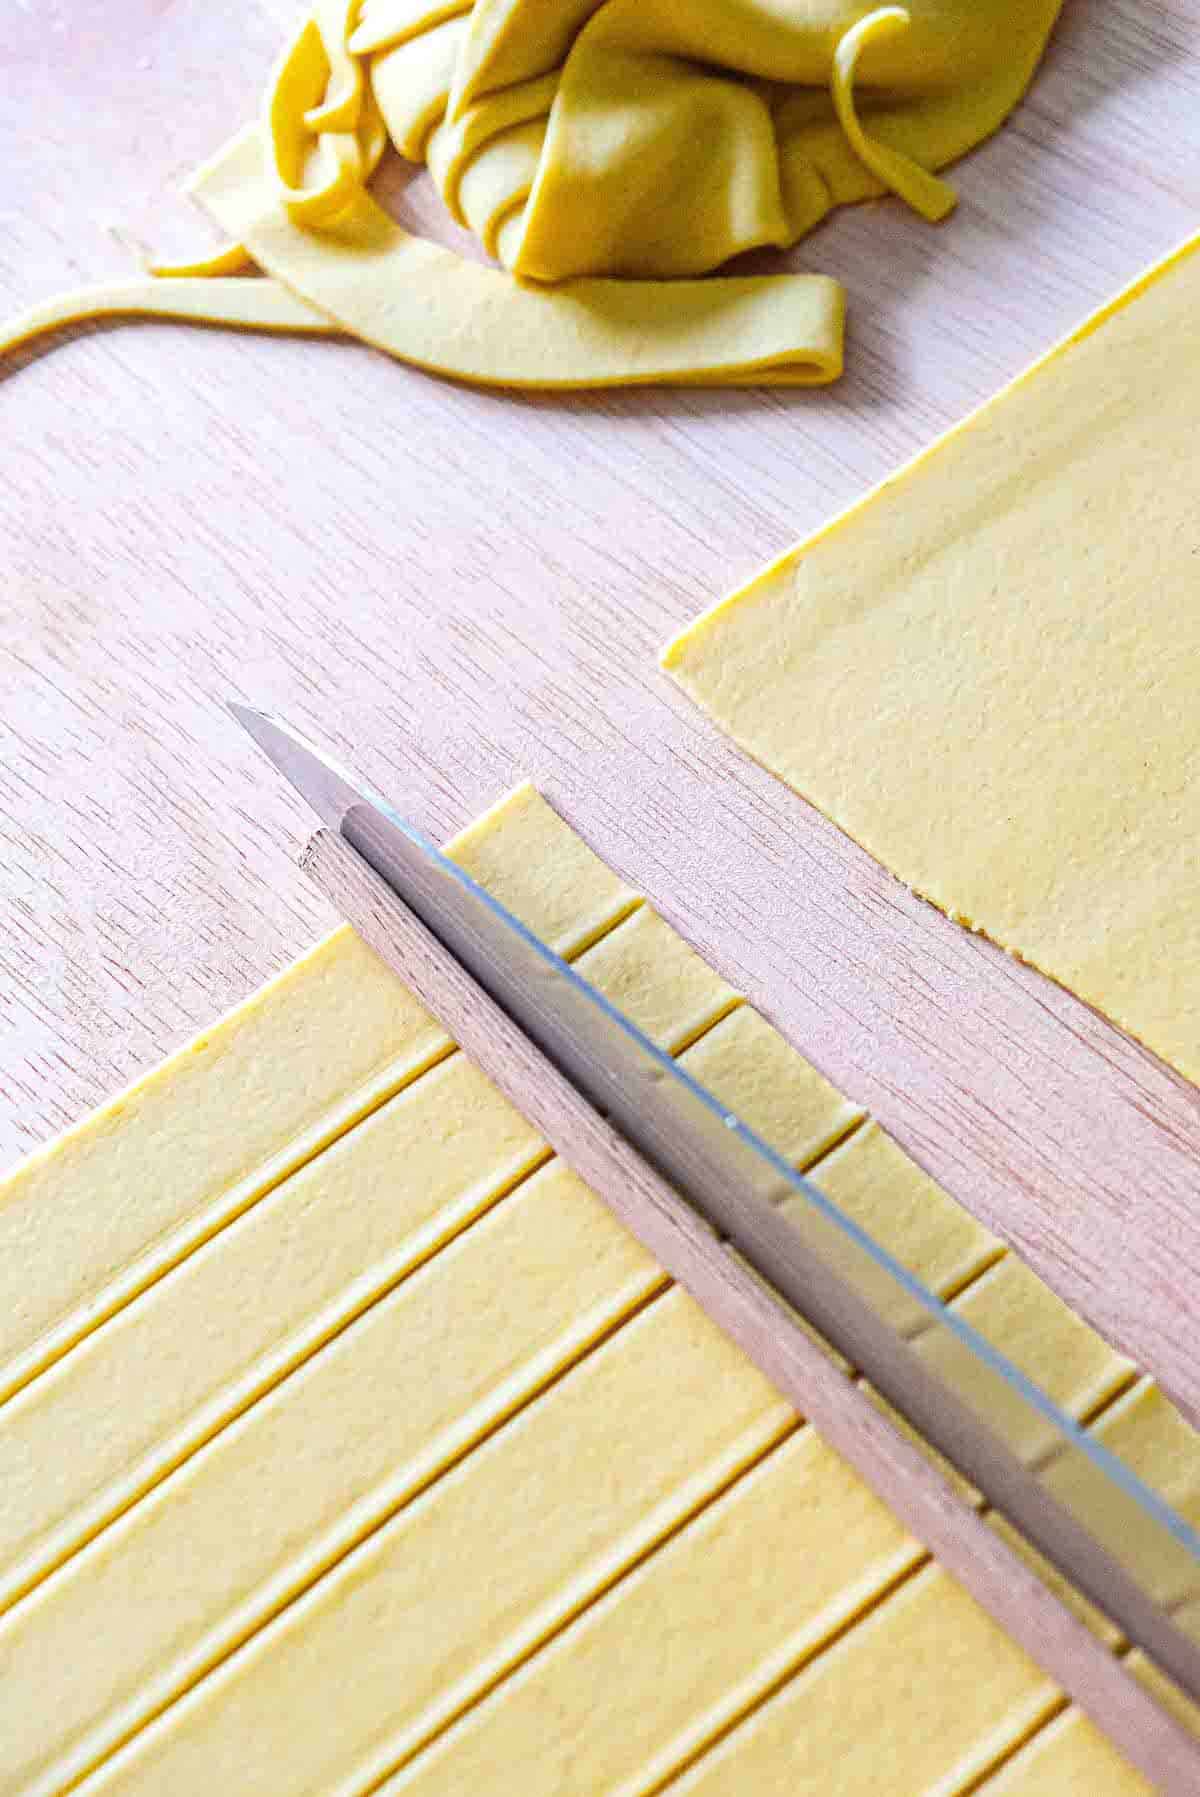 Cutting a sheet of pasta dough into squares using a large chef's knife and a wooden dowel as a guide.